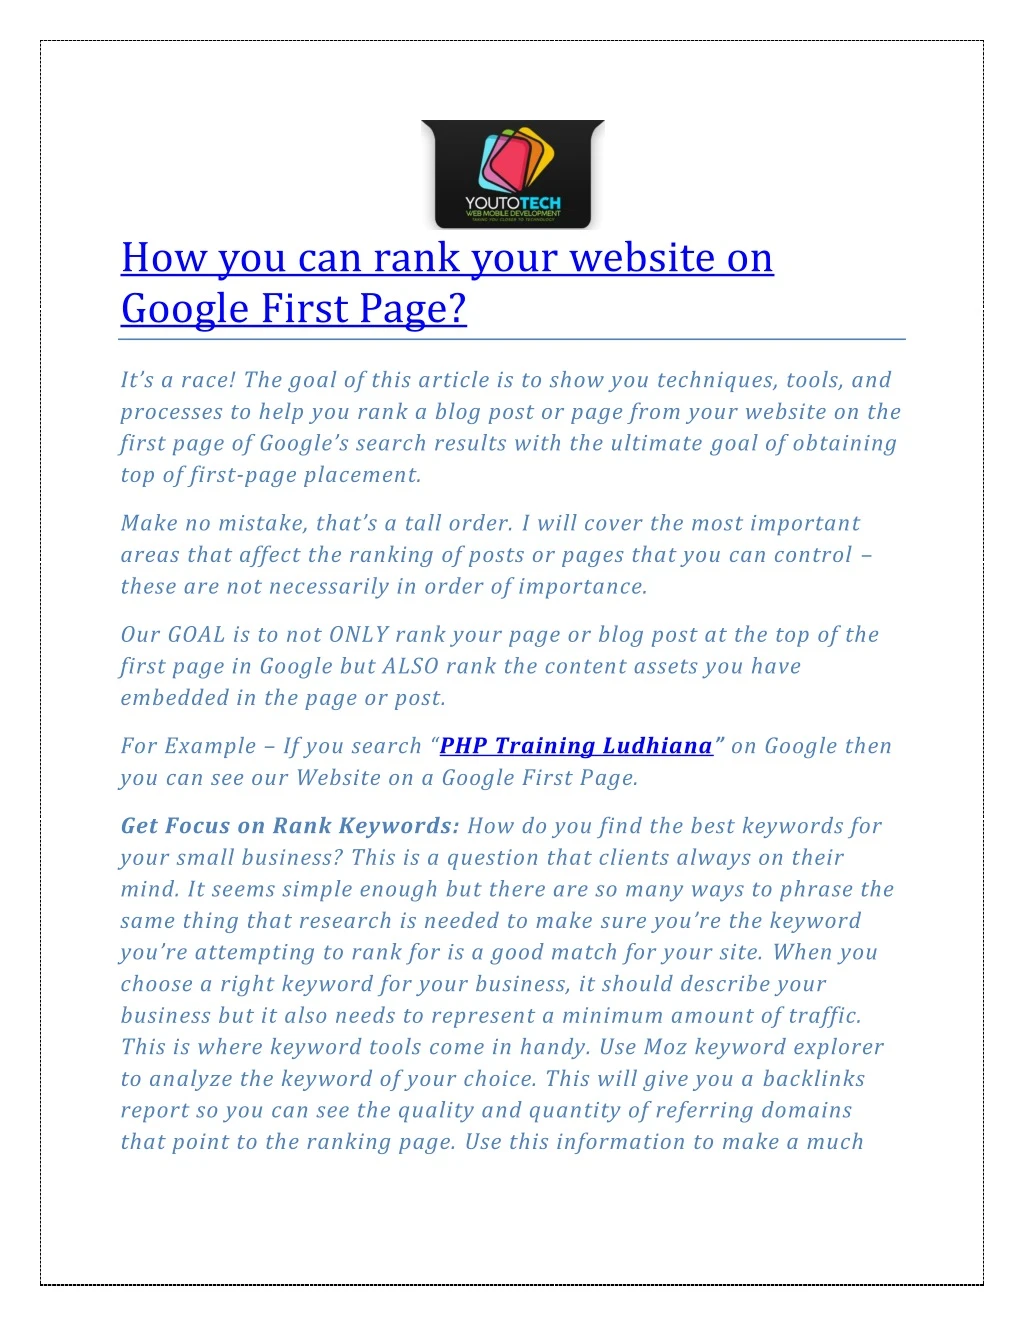 how you can rank your website on google first page